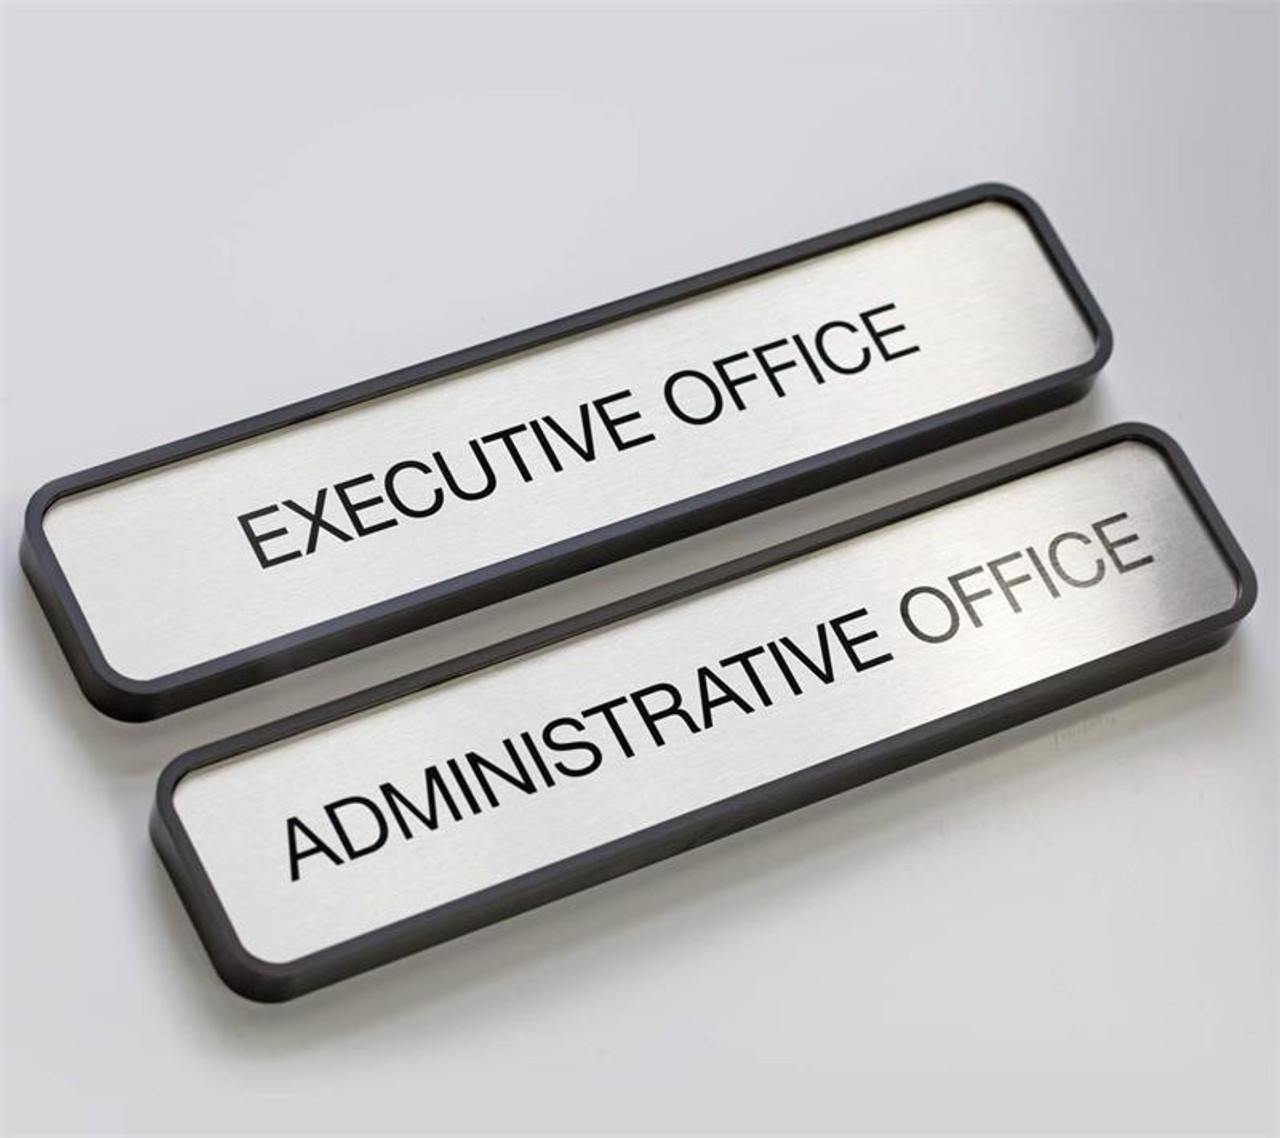 Create Professional Office Signage with Magnetic Nameplate Holders